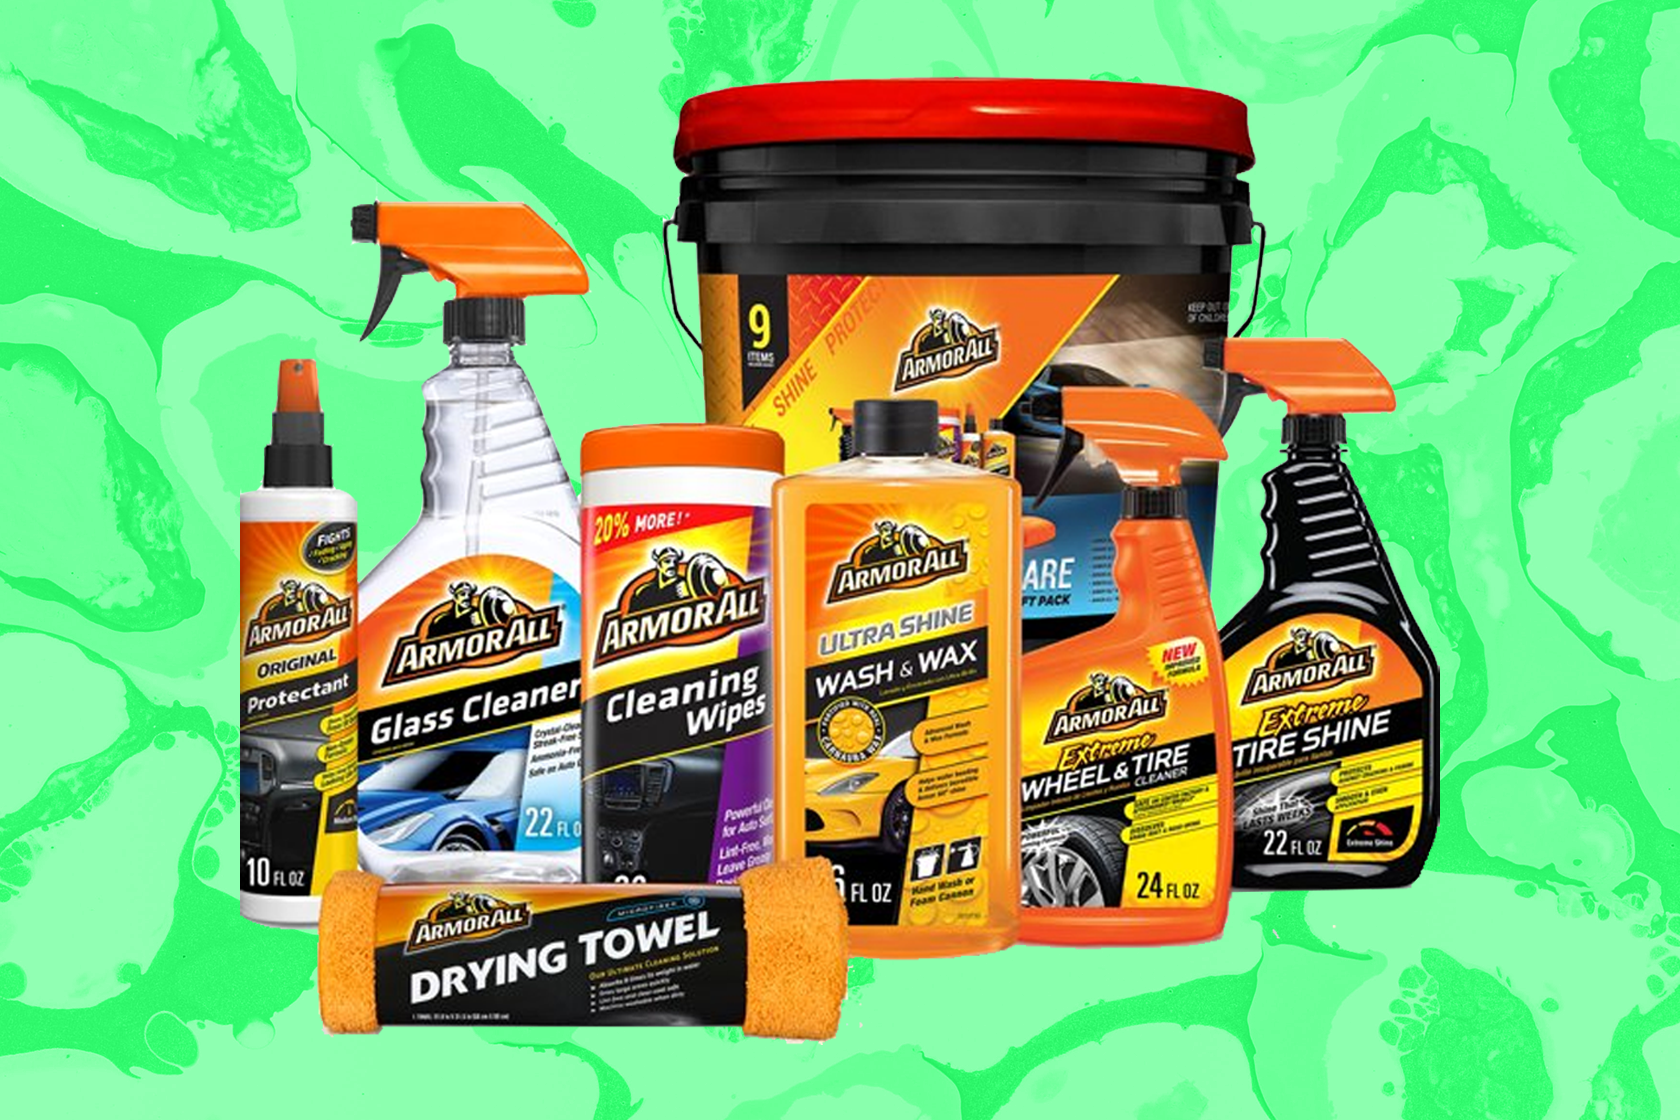 This Armor All 9-piece car care kit is just $19.88 at Walmart